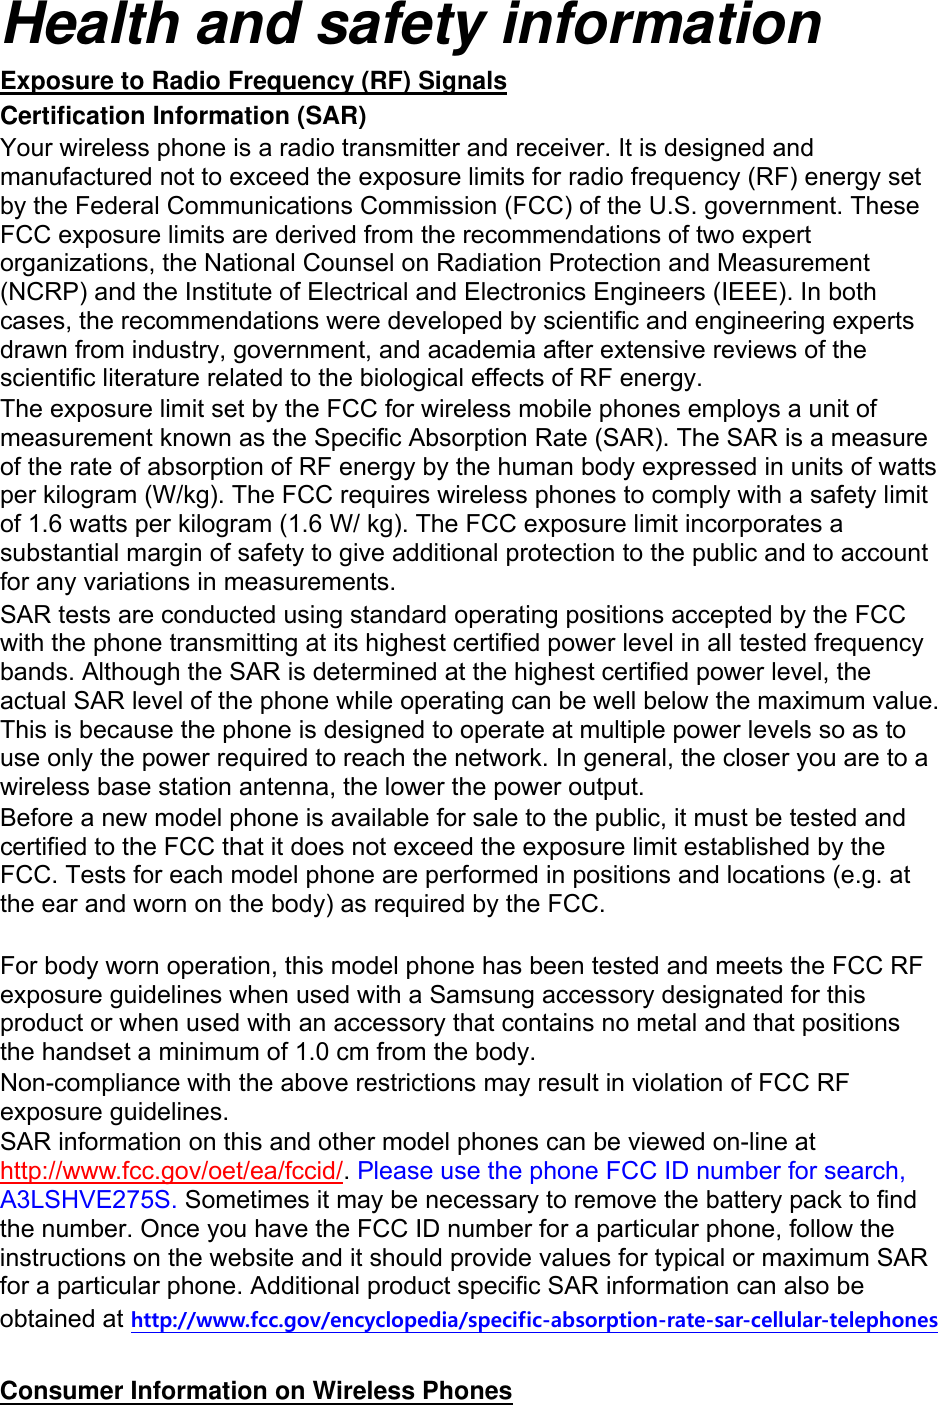 Health and safety information Exposure to Radio Frequency (RF) Signals Certification Information (SAR) Your wireless phone is a radio transmitter and receiver. It is designed and manufactured not to exceed the exposure limits for radio frequency (RF) energy set by the Federal Communications Commission (FCC) of the U.S. government. These FCC exposure limits are derived from the recommendations of two expert organizations, the National Counsel on Radiation Protection and Measurement (NCRP) and the Institute of Electrical and Electronics Engineers (IEEE). In both cases, the recommendations were developed by scientific and engineering experts drawn from industry, government, and academia after extensive reviews of the scientific literature related to the biological effects of RF energy. The exposure limit set by the FCC for wireless mobile phones employs a unit of measurement known as the Specific Absorption Rate (SAR). The SAR is a measure of the rate of absorption of RF energy by the human body expressed in units of watts per kilogram (W/kg). The FCC requires wireless phones to comply with a safety limit of 1.6 watts per kilogram (1.6 W/ kg). The FCC exposure limit incorporates a substantial margin of safety to give additional protection to the public and to account for any variations in measurements. SAR tests are conducted using standard operating positions accepted by the FCC with the phone transmitting at its highest certified power level in all tested frequency bands. Although the SAR is determined at the highest certified power level, the actual SAR level of the phone while operating can be well below the maximum value. This is because the phone is designed to operate at multiple power levels so as to use only the power required to reach the network. In general, the closer you are to a wireless base station antenna, the lower the power output. Before a new model phone is available for sale to the public, it must be tested and certified to the FCC that it does not exceed the exposure limit established by the FCC. Tests for each model phone are performed in positions and locations (e.g. at the ear and worn on the body) as required by the FCC.      For body worn operation, this model phone has been tested and meets the FCC RF exposure guidelines when used with a Samsung accessory designated for this product or when used with an accessory that contains no metal and that positions the handset a minimum of 1.0 cm from the body.   Non-compliance with the above restrictions may result in violation of FCC RF exposure guidelines. SAR information on this and other model phones can be viewed on-line at http://www.fcc.gov/oet/ea/fccid/. Please use the phone FCC ID number for search, A3LSHVE275S. Sometimes it may be necessary to remove the battery pack to find the number. Once you have the FCC ID number for a particular phone, follow the instructions on the website and it should provide values for typical or maximum SAR for a particular phone. Additional product specific SAR information can also be obtained at http://www.fcc.gov/encyclopedia/specific-absorption-rate-sar-cellular-telephones  Consumer Information on Wireless Phones 